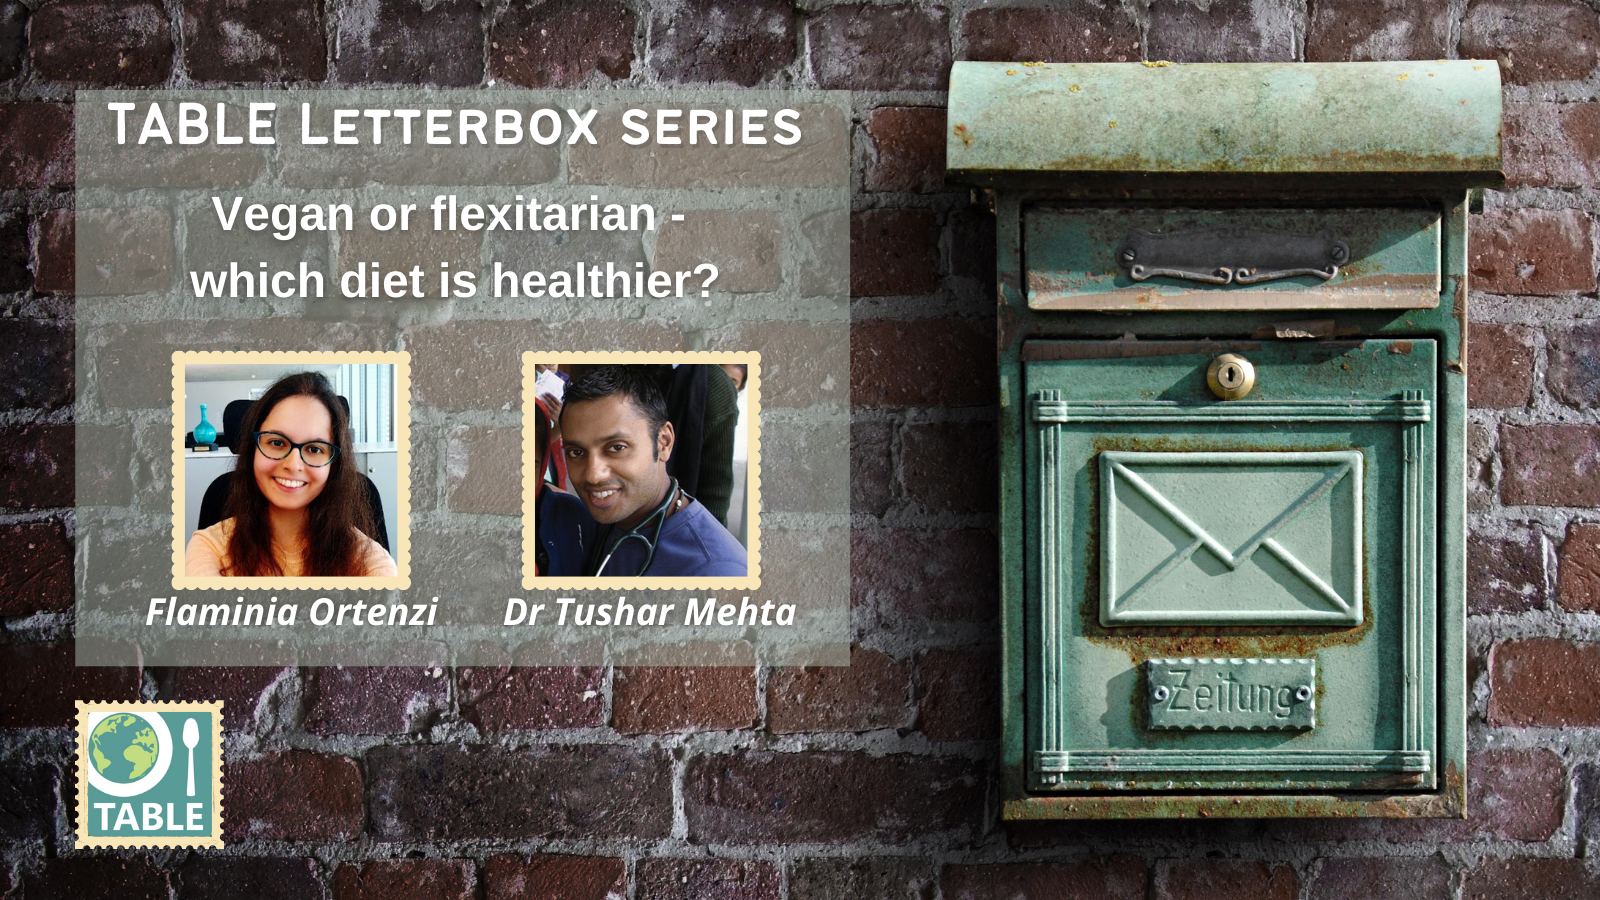 TABLE Letterbox Series - Vegan or flexitarian - which diet is healthier? - with Flaminia Ortenzi and Dr Tushar Mehta